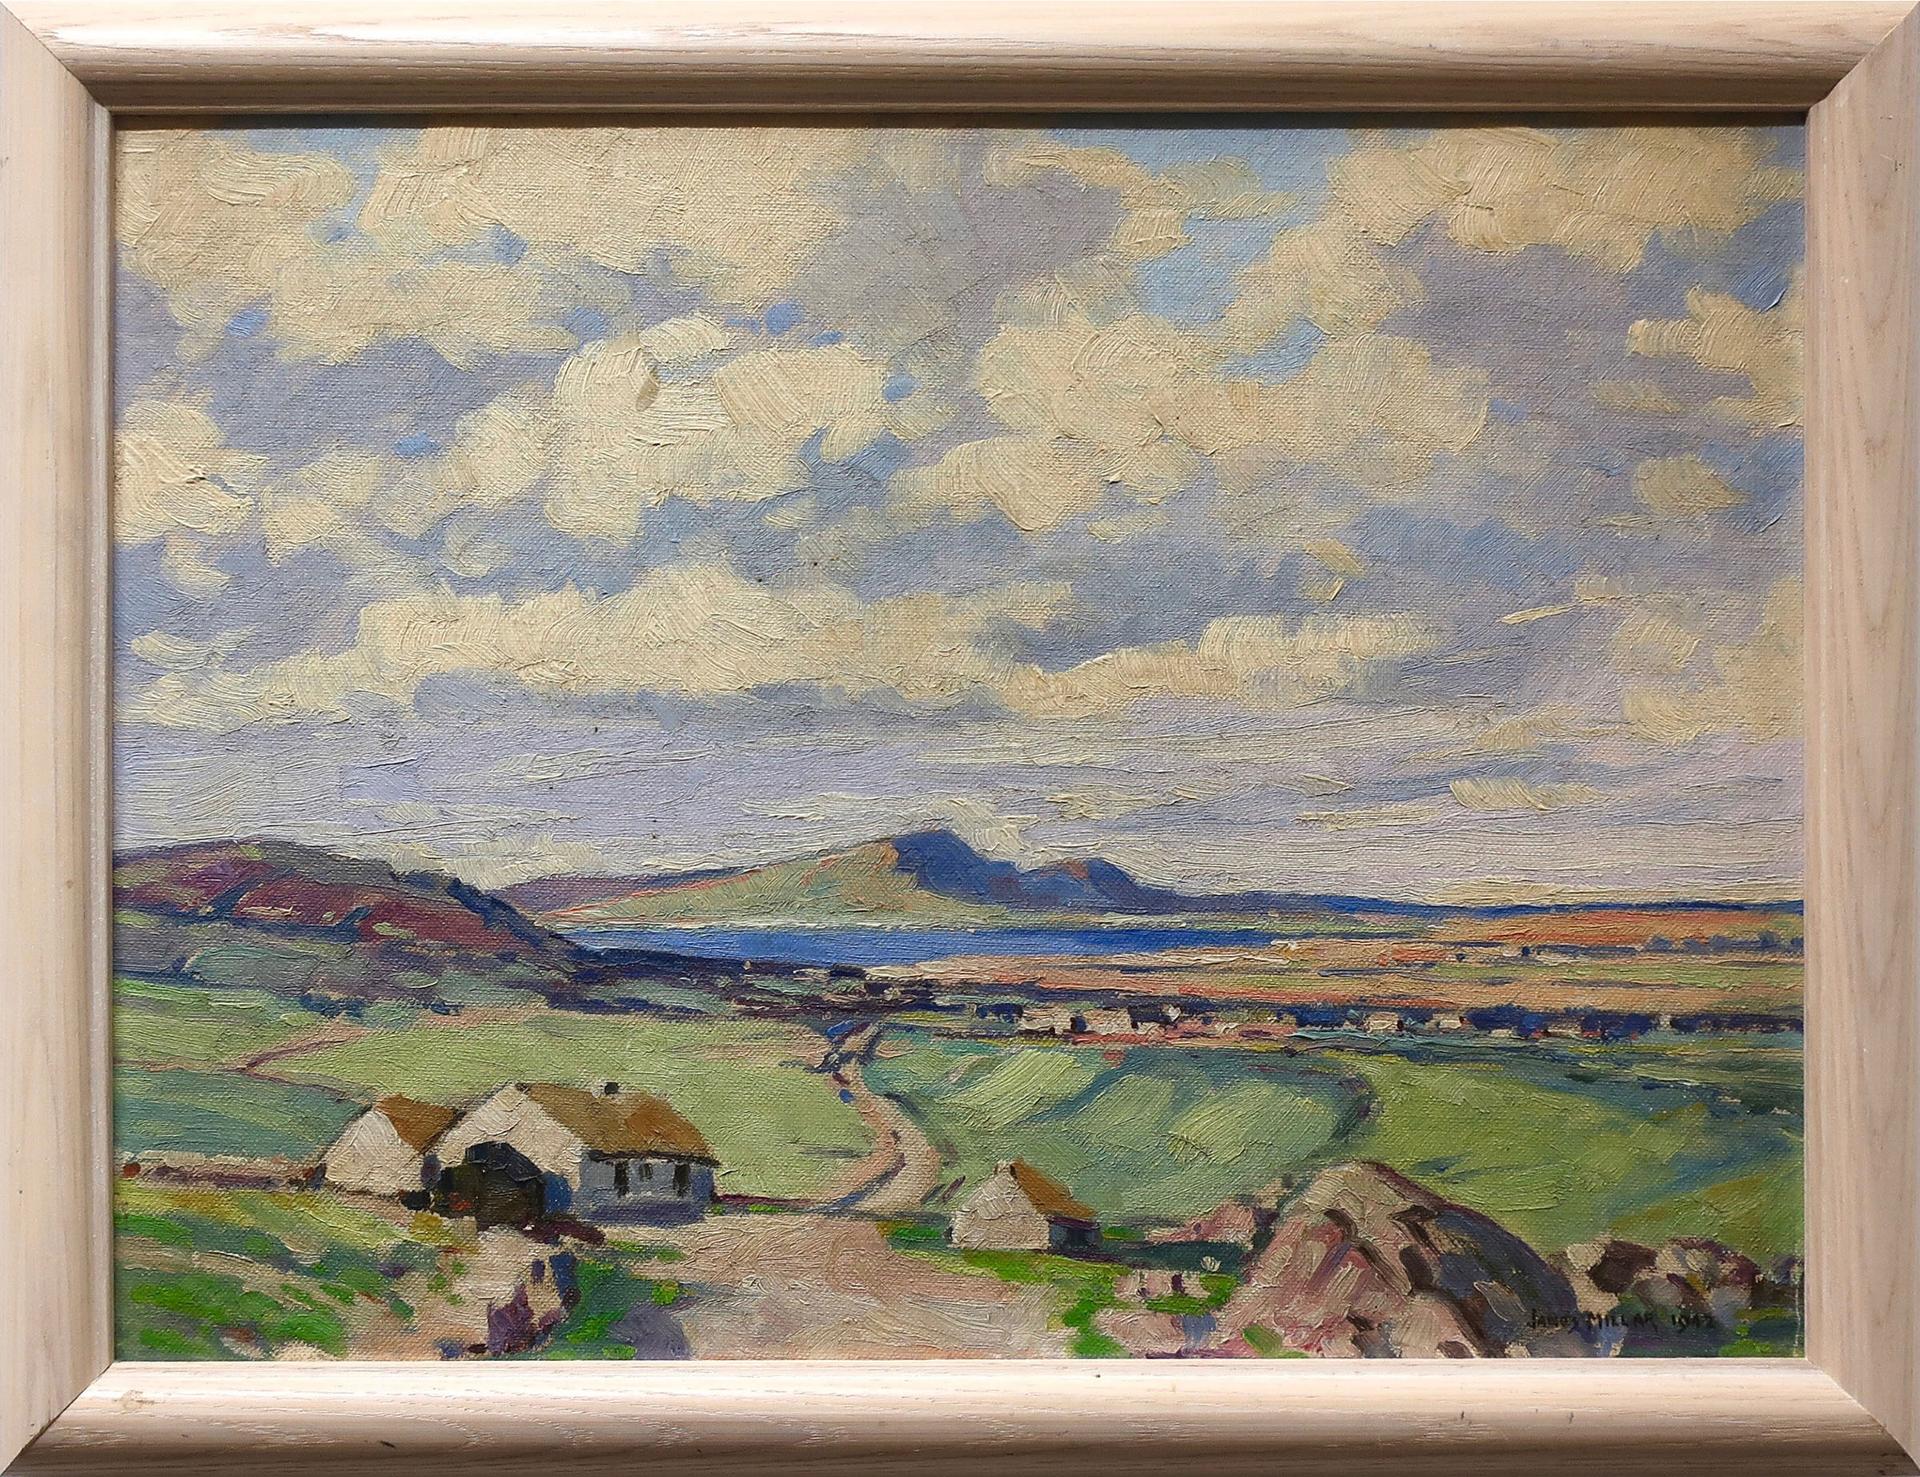 James Millar (1897-1977) - County Donegal, N. Ireland (Arranmore From The Rosses)